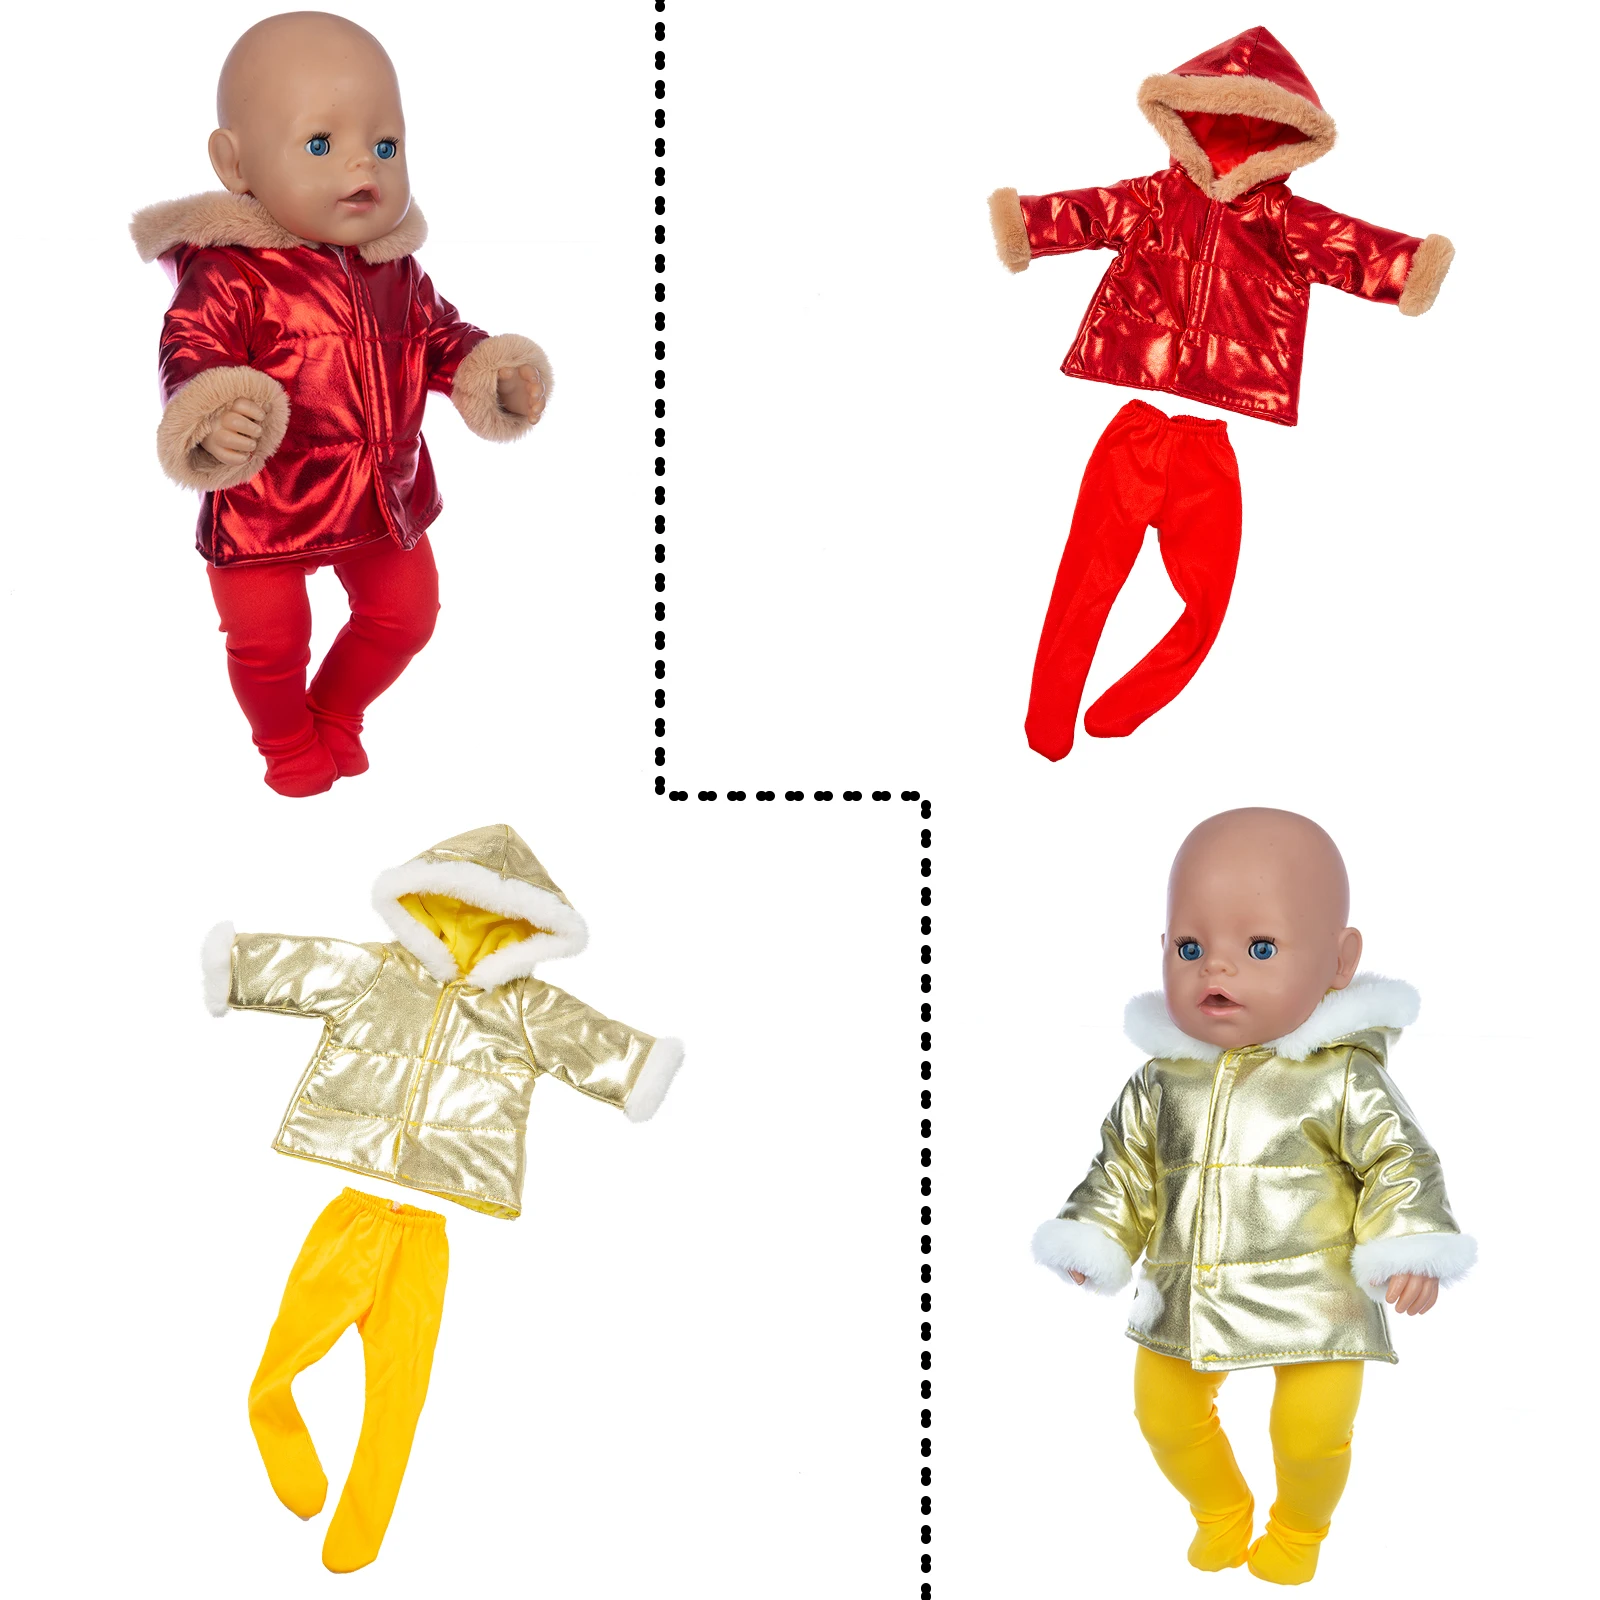 2022 New Down jacket + leggings Doll Clothes Fit For 18inch/43cm born baby Doll clothes reborn Doll Accessories